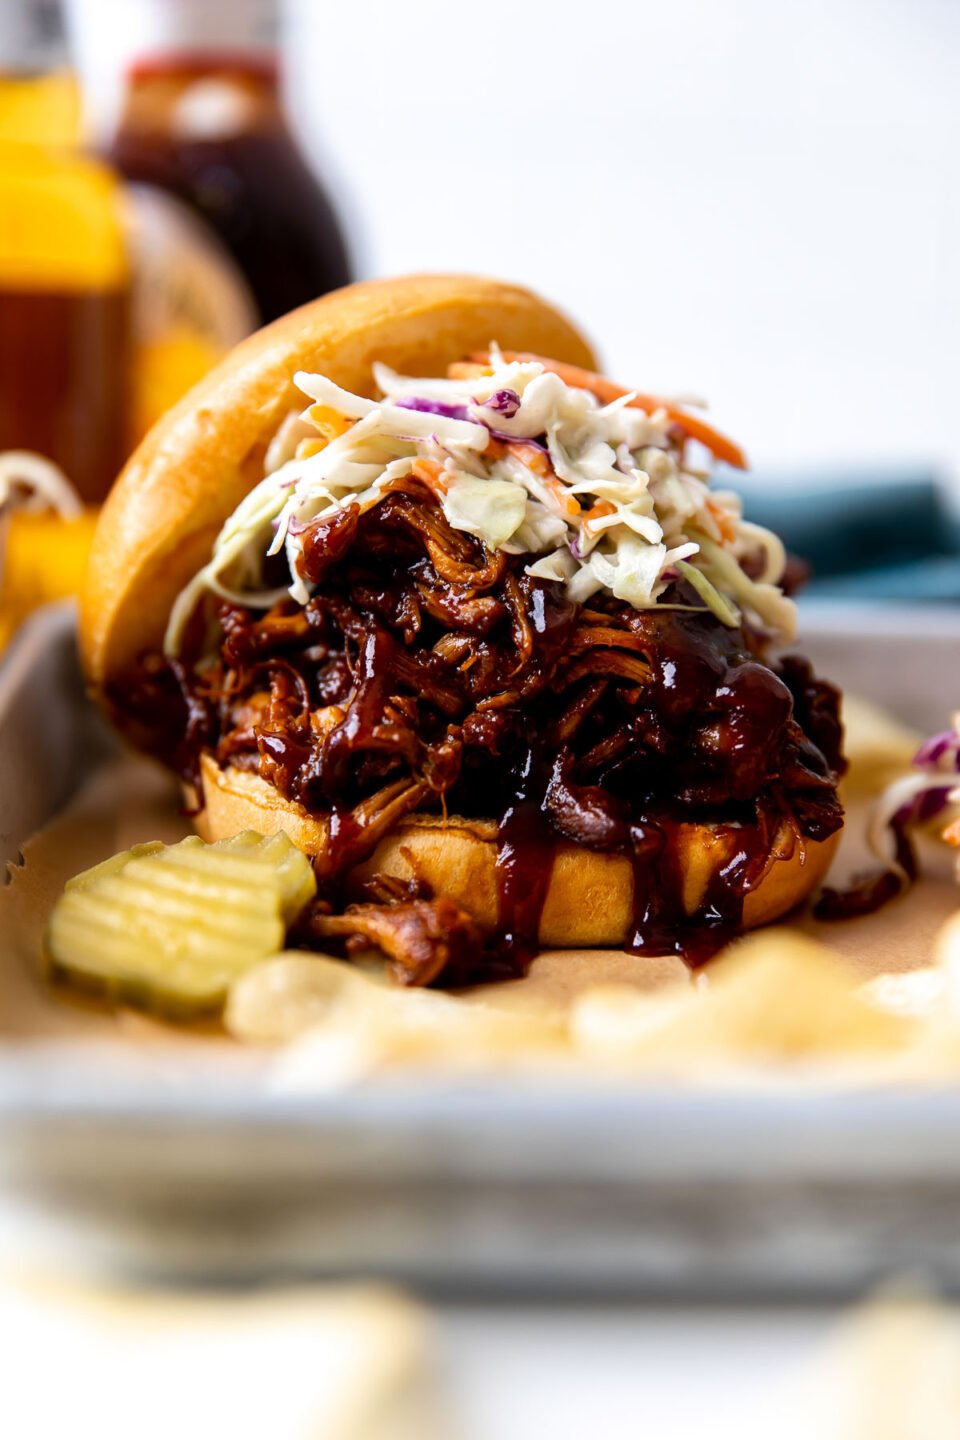 A side angle shot of a single BBQ shredded chicken sandwiches arranged atop a parchment lined baking sheet. The sandwich has been topped with coleslaw and served alongside pickle chips. A bottle of beer, a bottle of BBQ sauce, and a blue linen napkin are shown out of focus in the background.